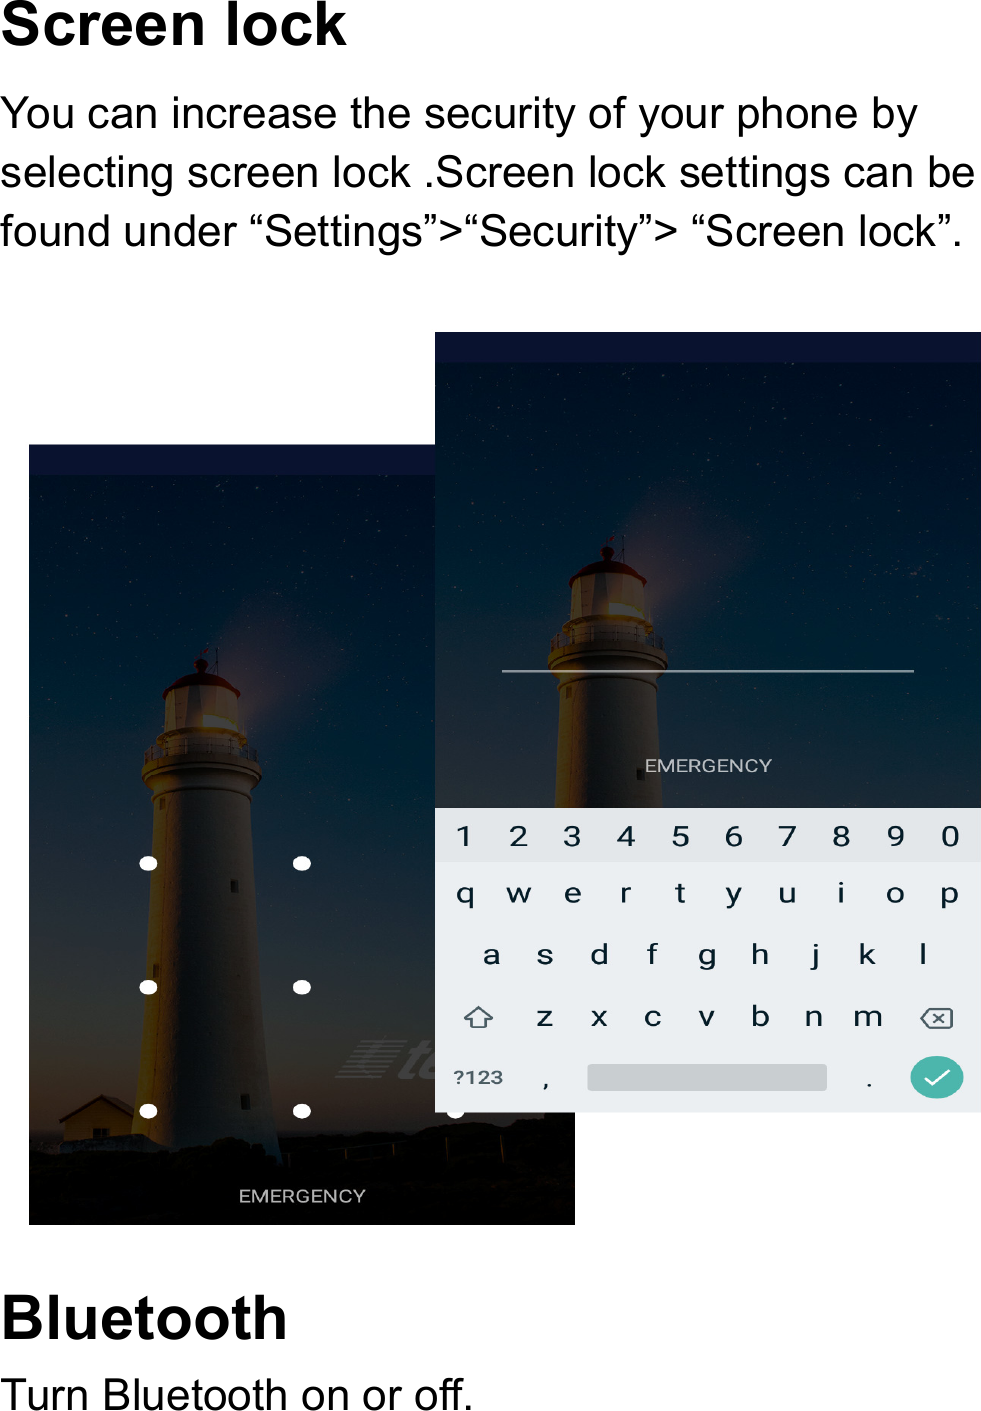 Screen lock You can increase the security of your phone by selecting screen lock .Screen lock settings can be found under “Settings”&gt;“Security”&gt; “Screen lock”.  Bluetooth Turn Bluetooth on or off.  